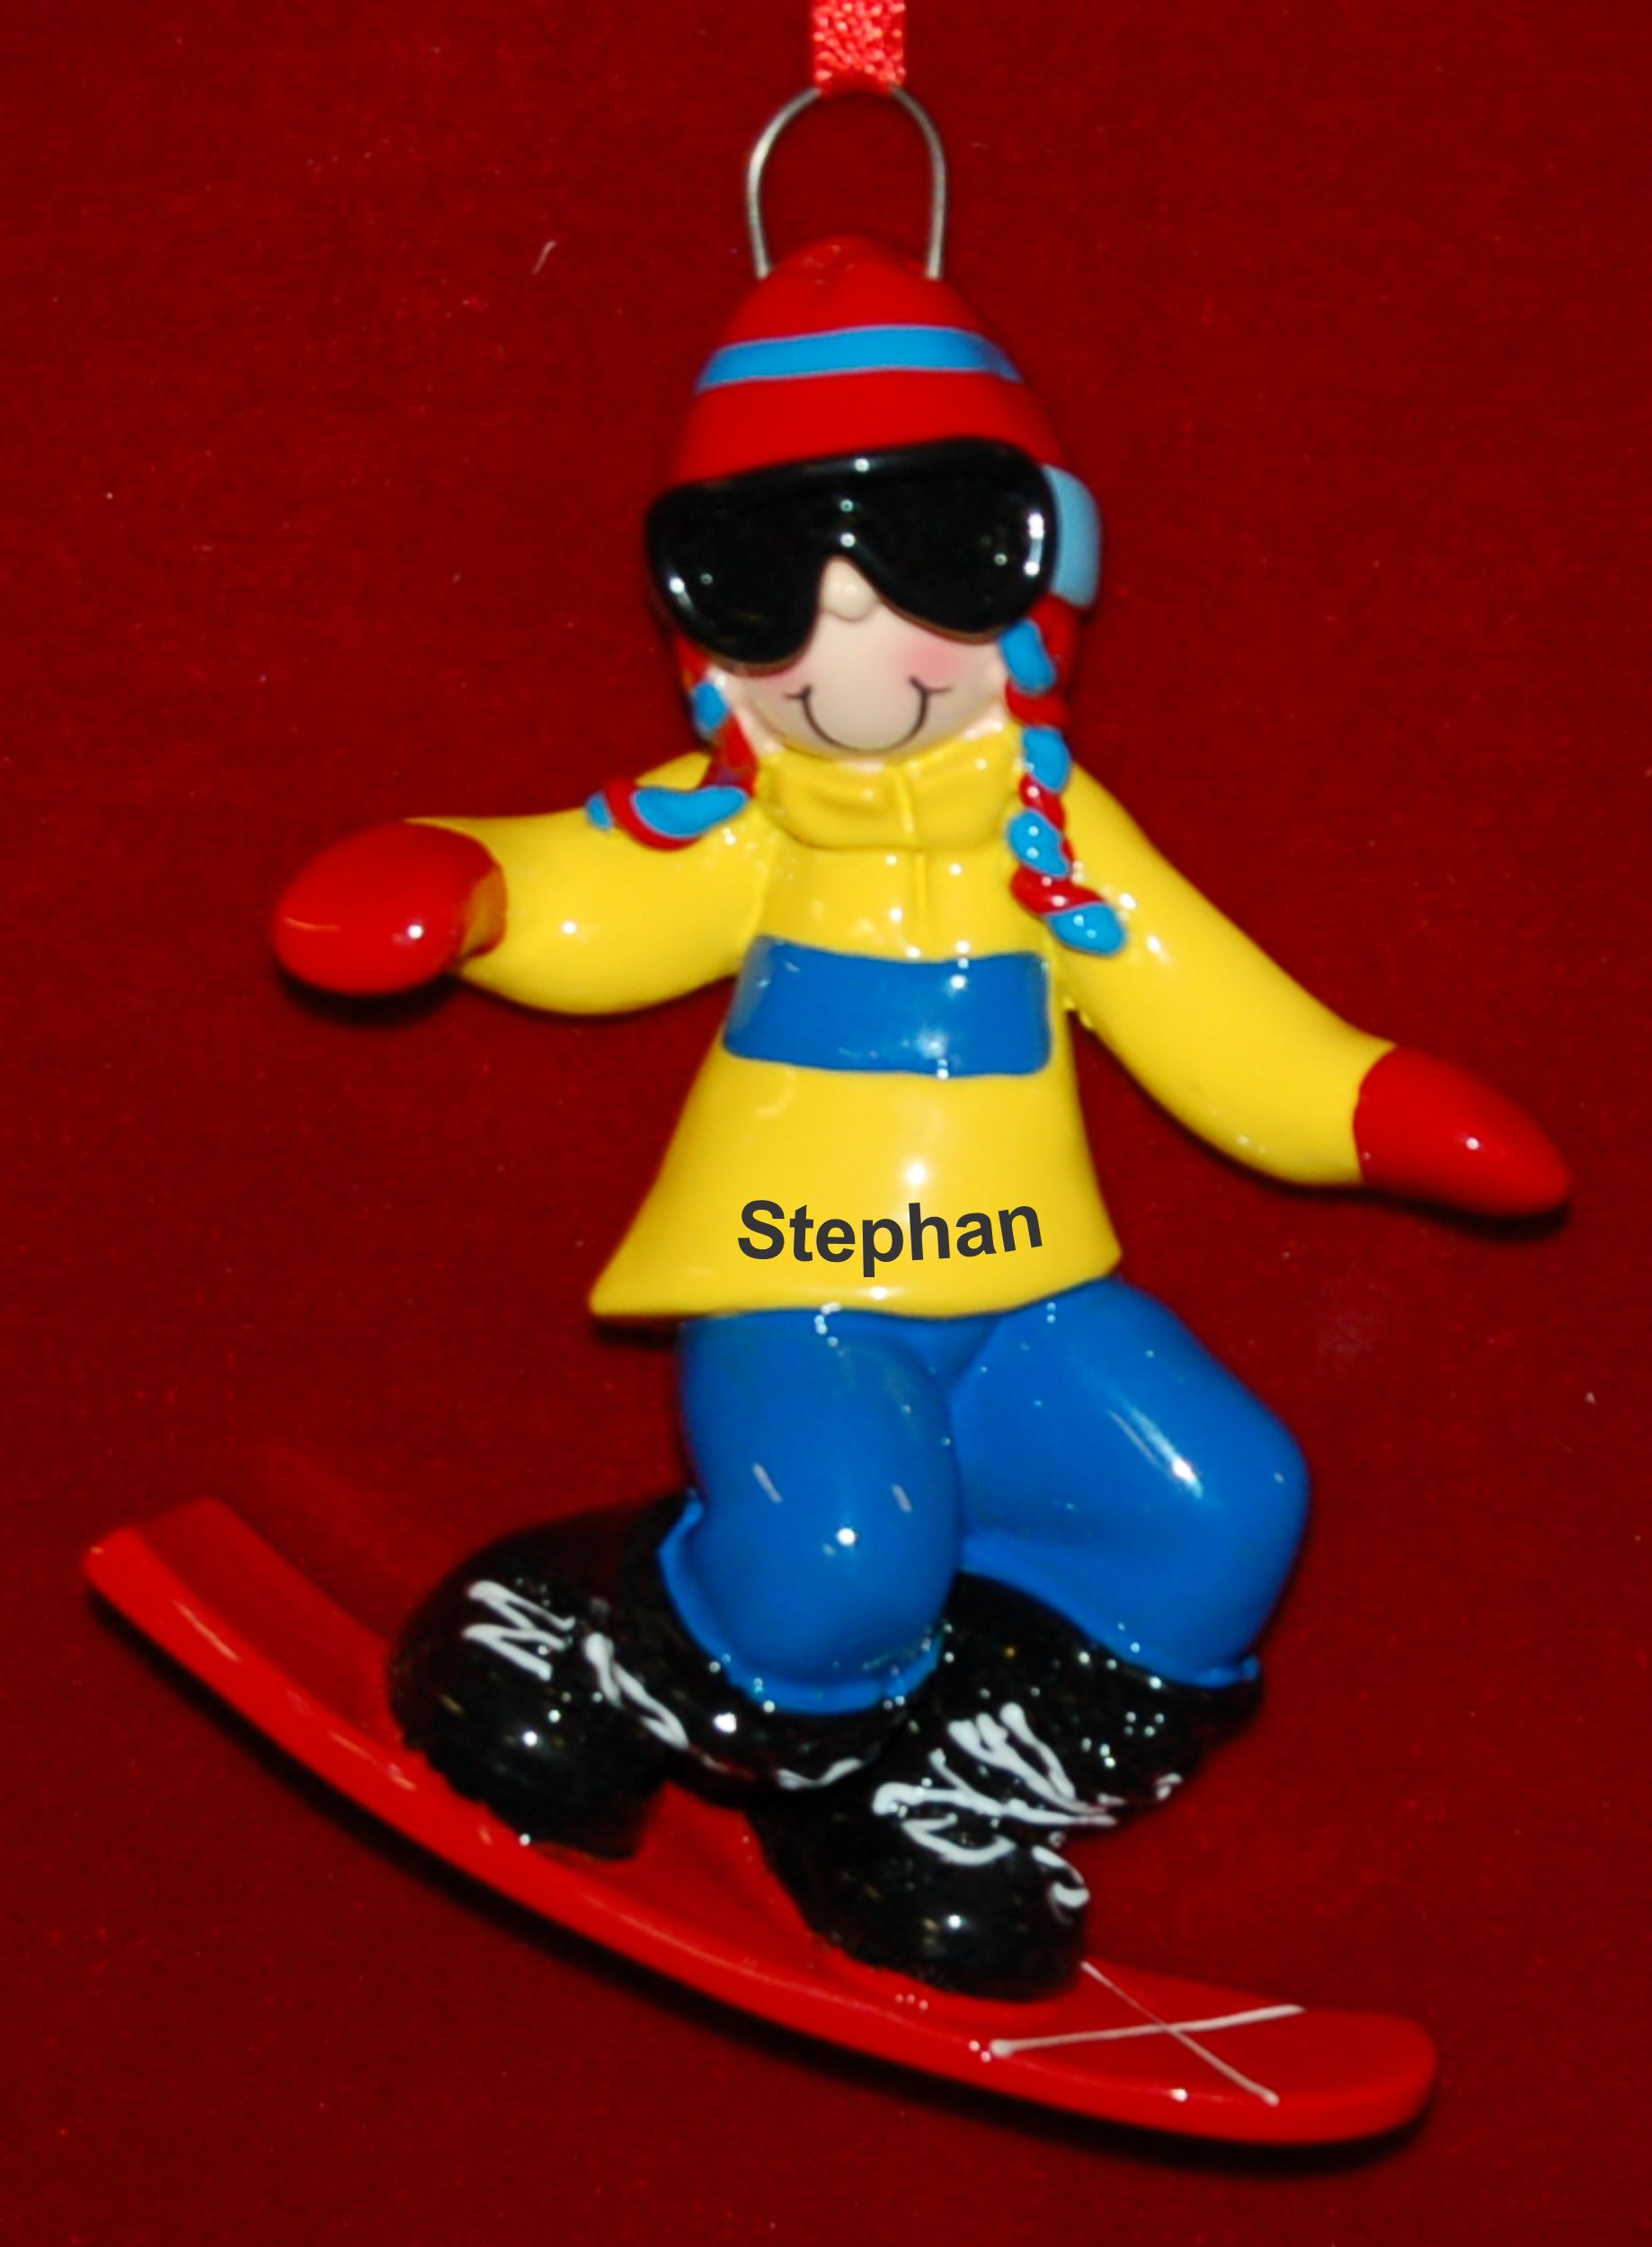 Snowboard Christmas Ornament Male Personalized by RussellRhodes.com